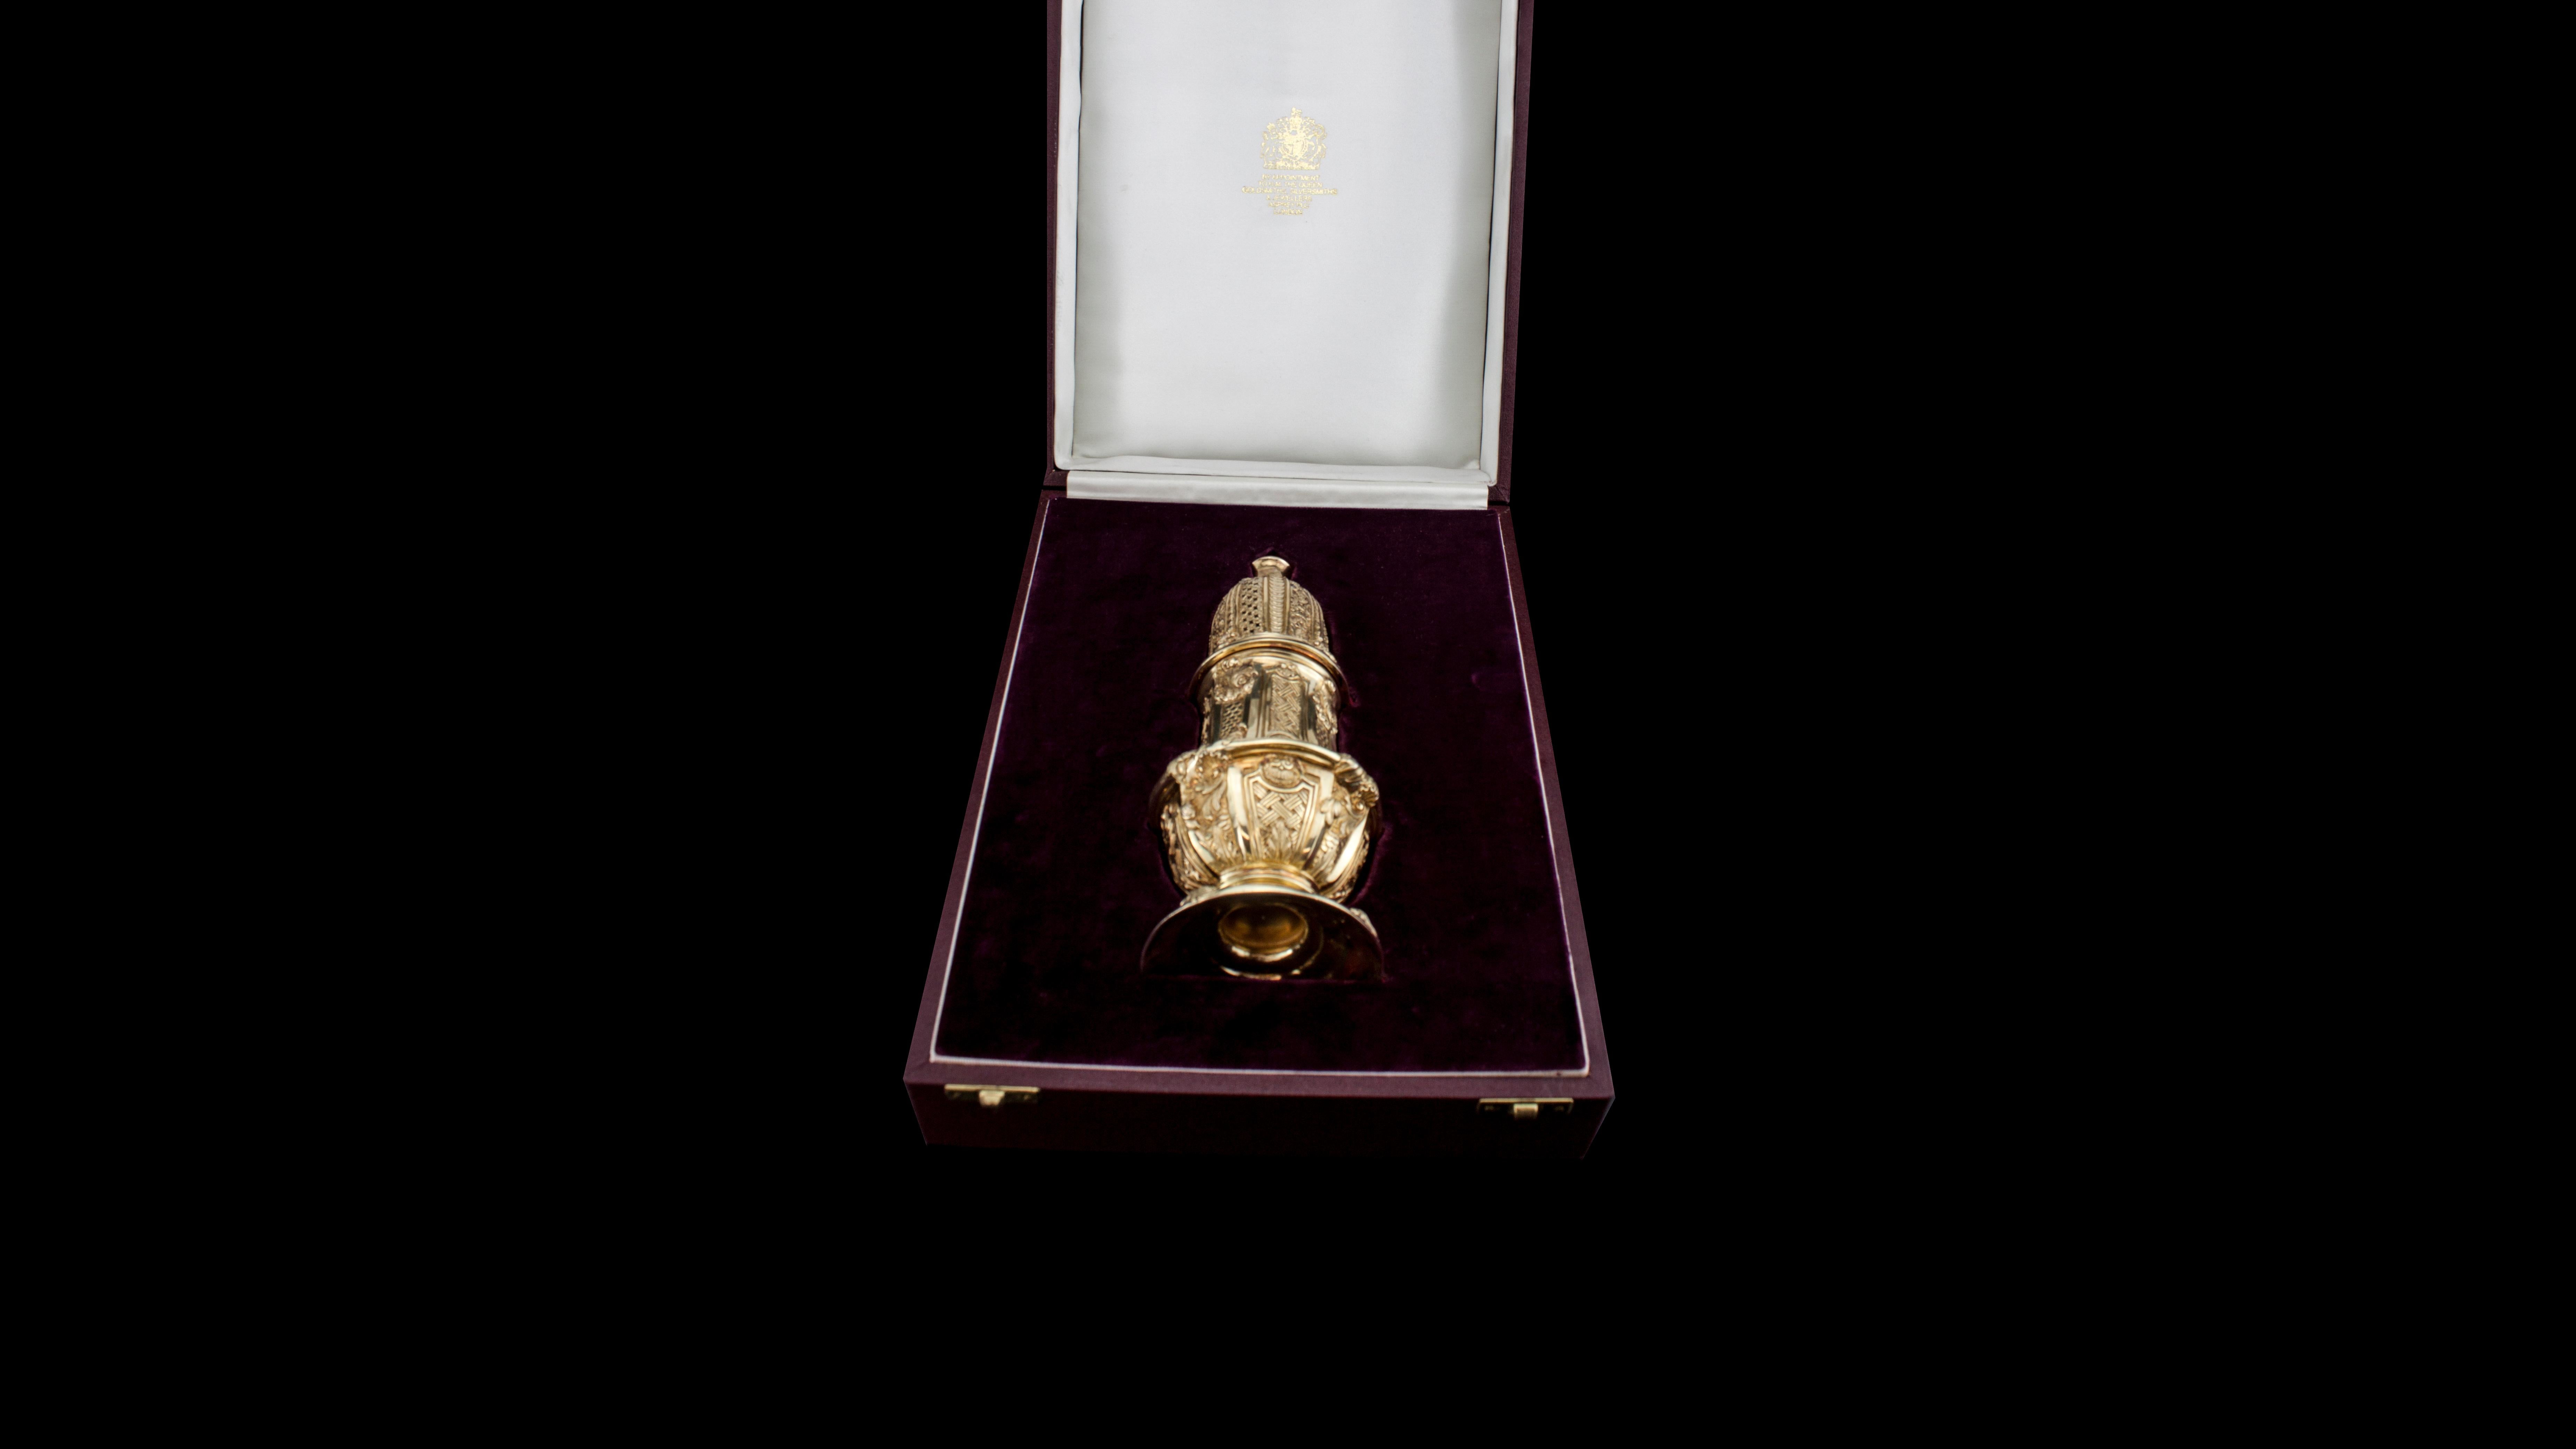 Antique Edwardian large sugar caster
Made in England, London, 1904
Maker: Wakely & Wheeler (James Wakely & Frank Clarke Wheeler)
Retailed By Asprey PLC London, by Appointment to H.M The Queen Goldsmiths, Silversmiths & Jewellers
Fully